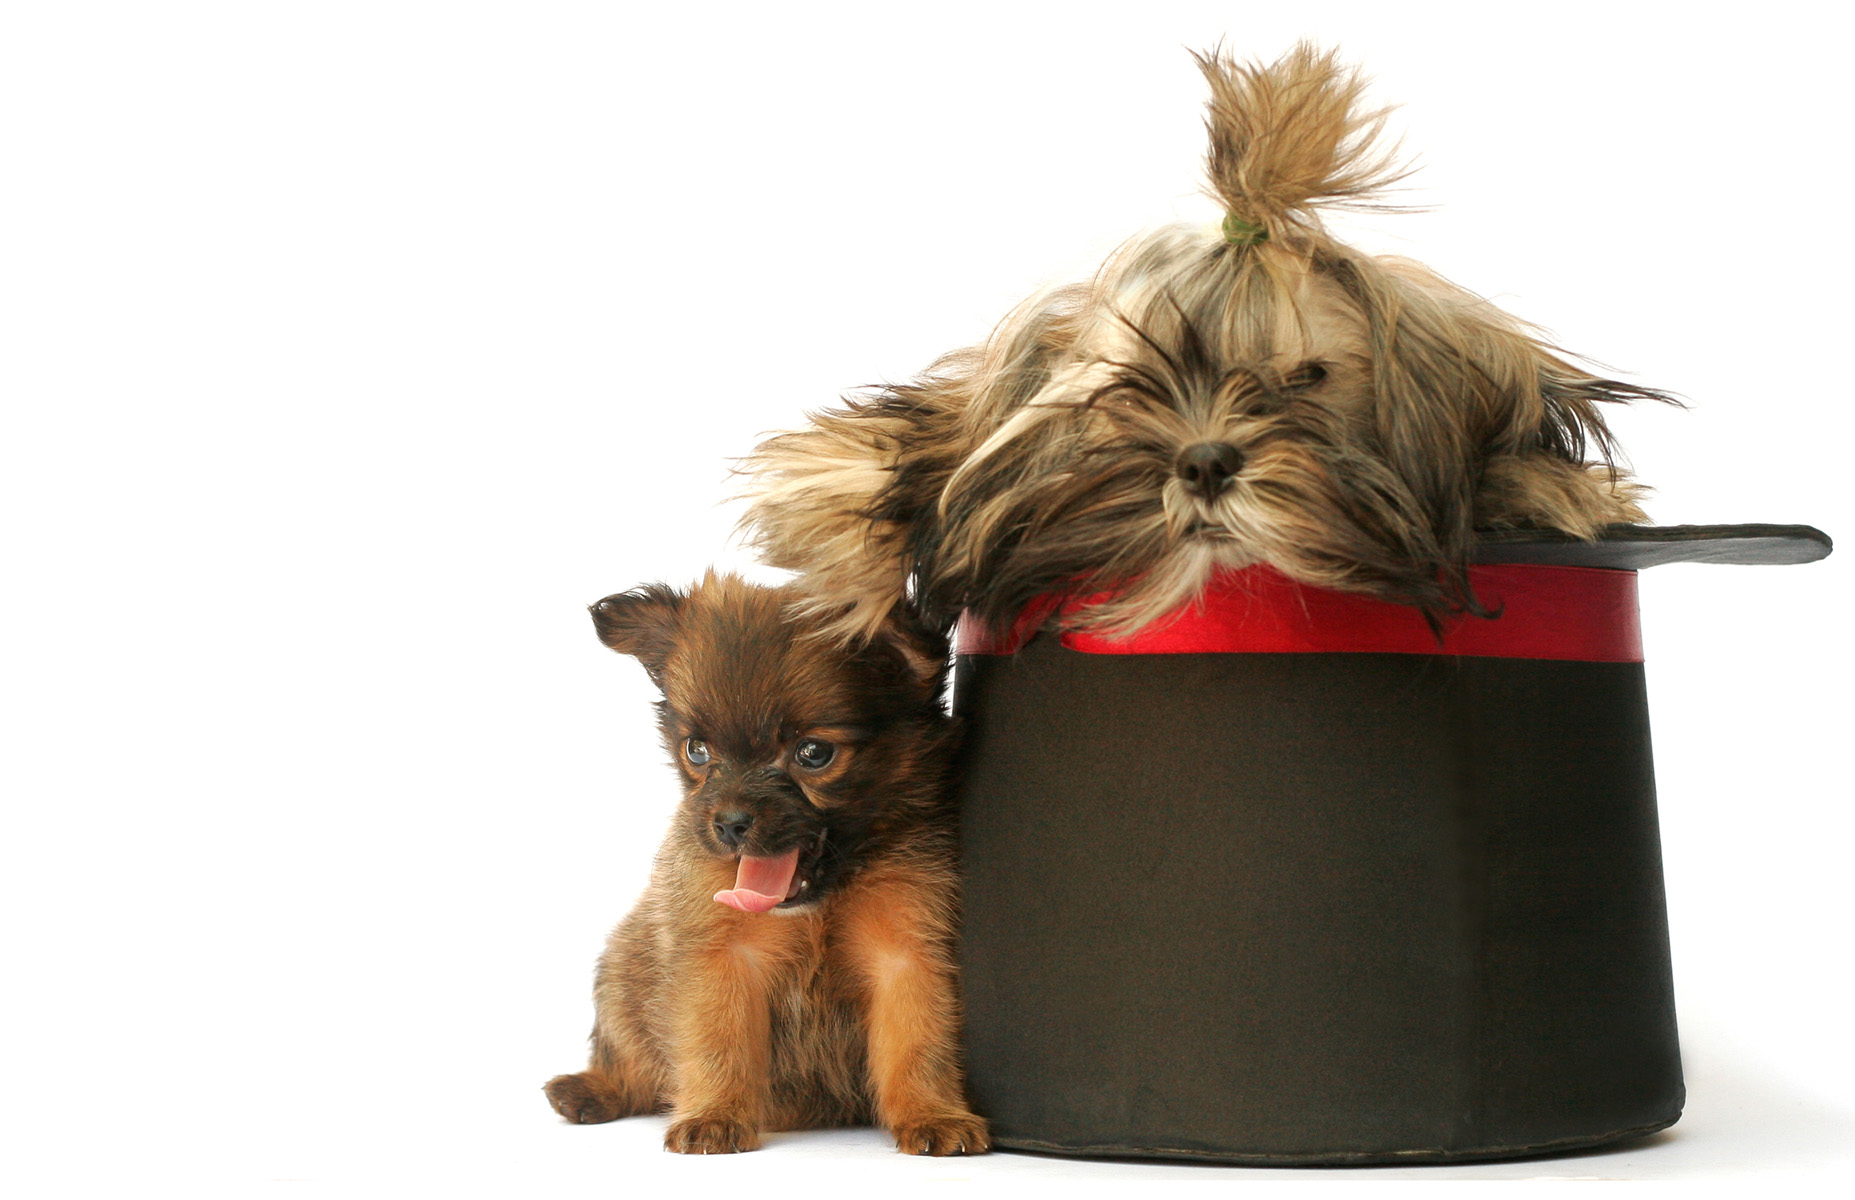 Toochie and Poochie, Animals, Bspo06, Cute, Dog, HQ Photo